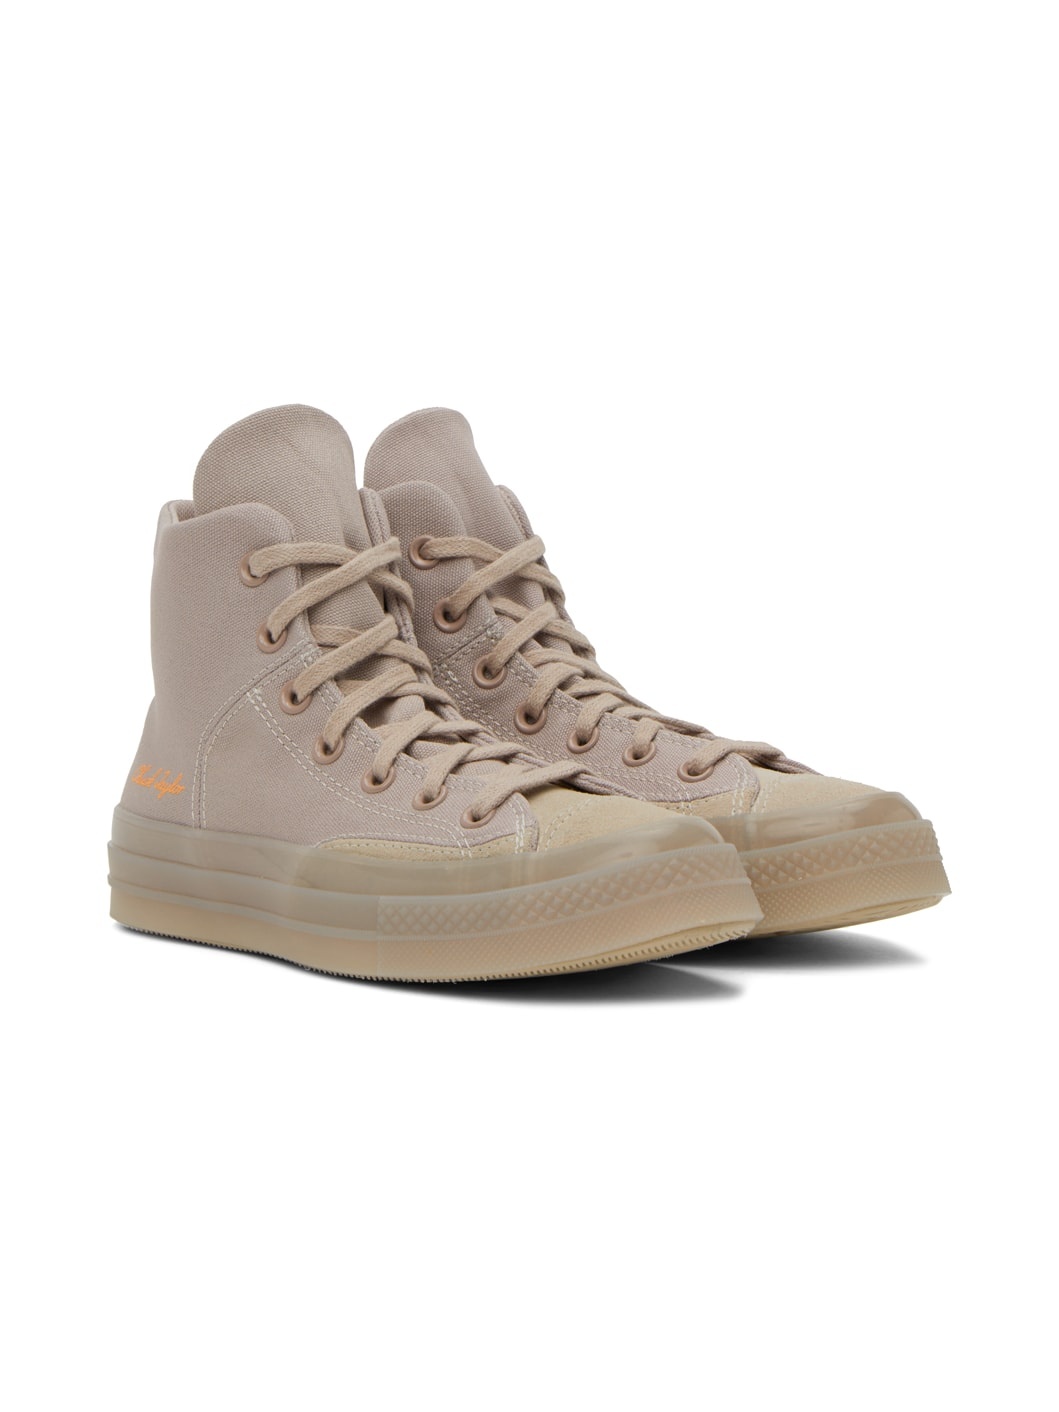 Gray Chuck 70 Marquis High Sneakers - 4